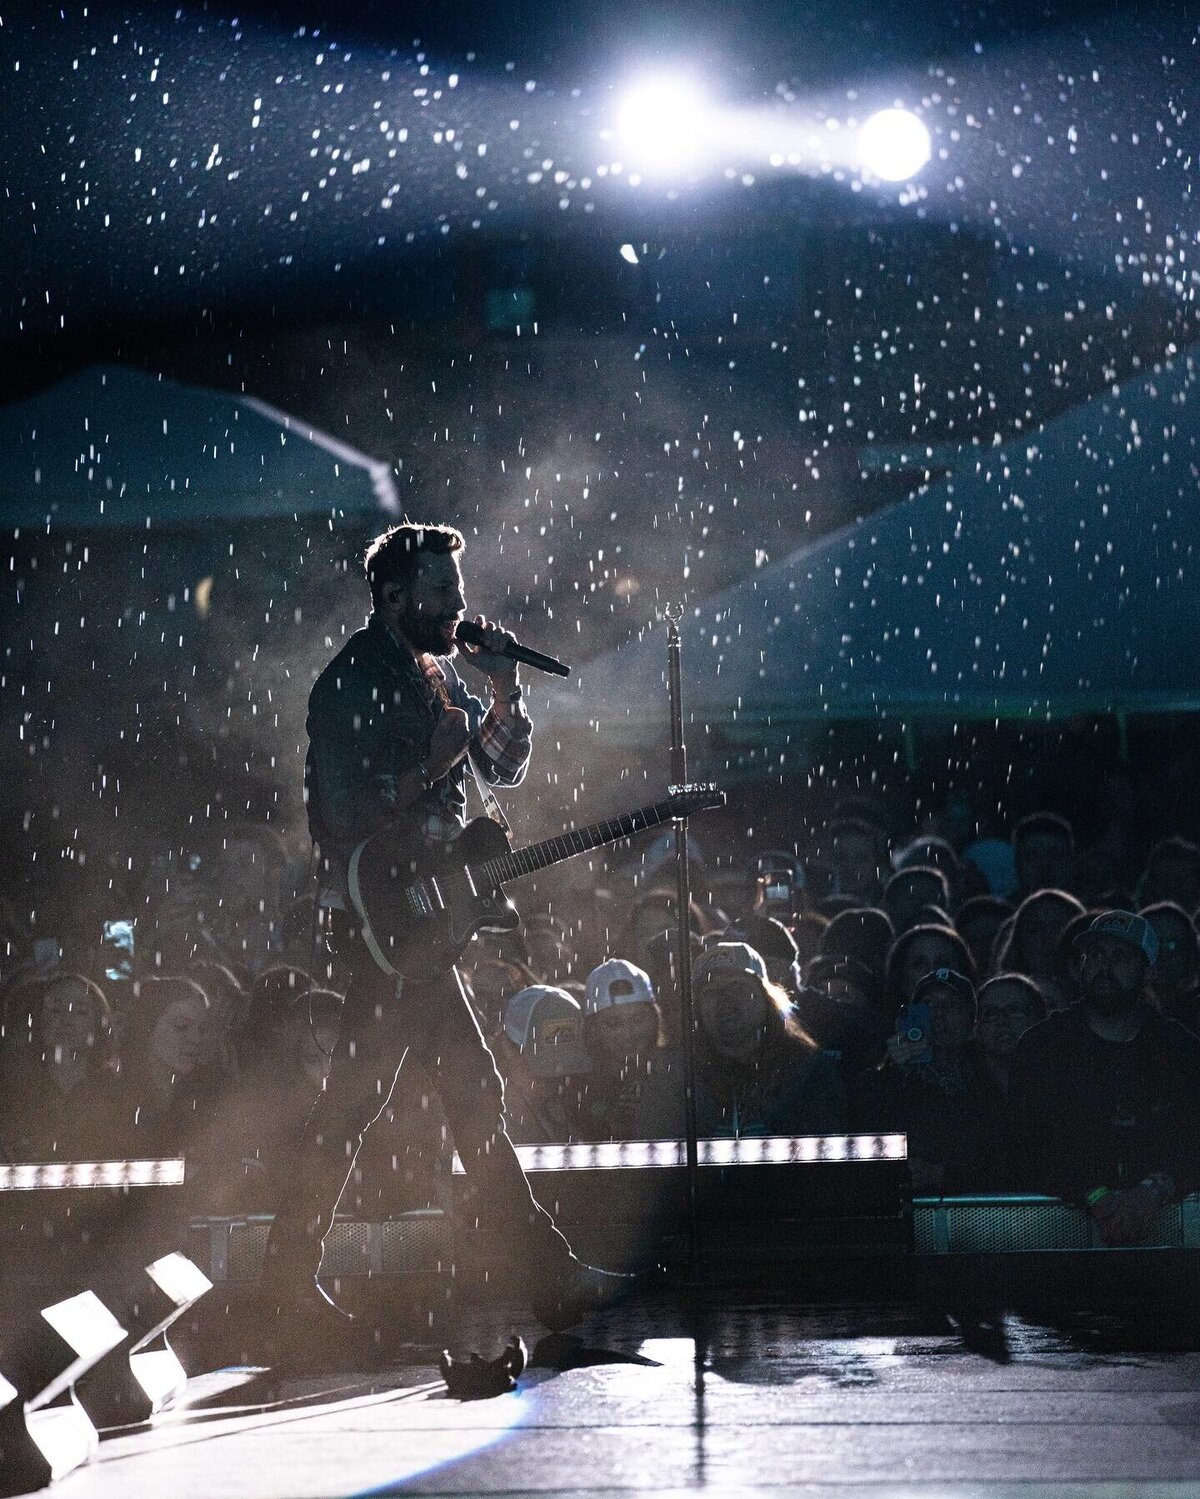 Matthew Ramsey performing in rain during Old Dominion concert